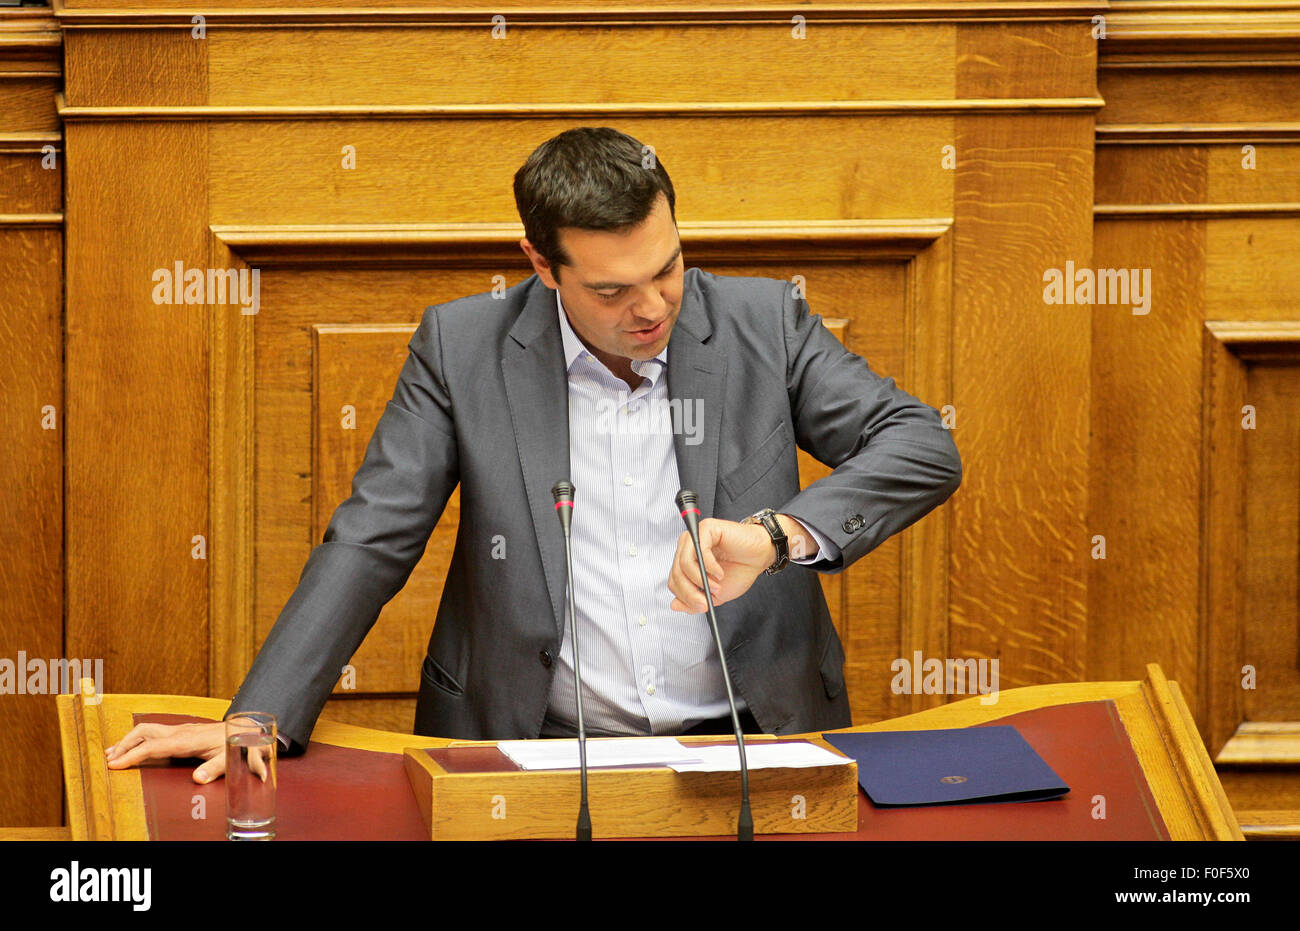 Athens. 14th Aug, 2015. Greek Prime Minister Alexis Tsipras gives a speech before the roll call vote in the parliament in Athens, Greece, Aug. 14, 2015. The Greek Parliament on Friday ratified the country's third bailout deal since 2010 to secure vital international financing to remain afloat and stay in the euro zone. © Xinhua/Alamy Live News Stock Photo